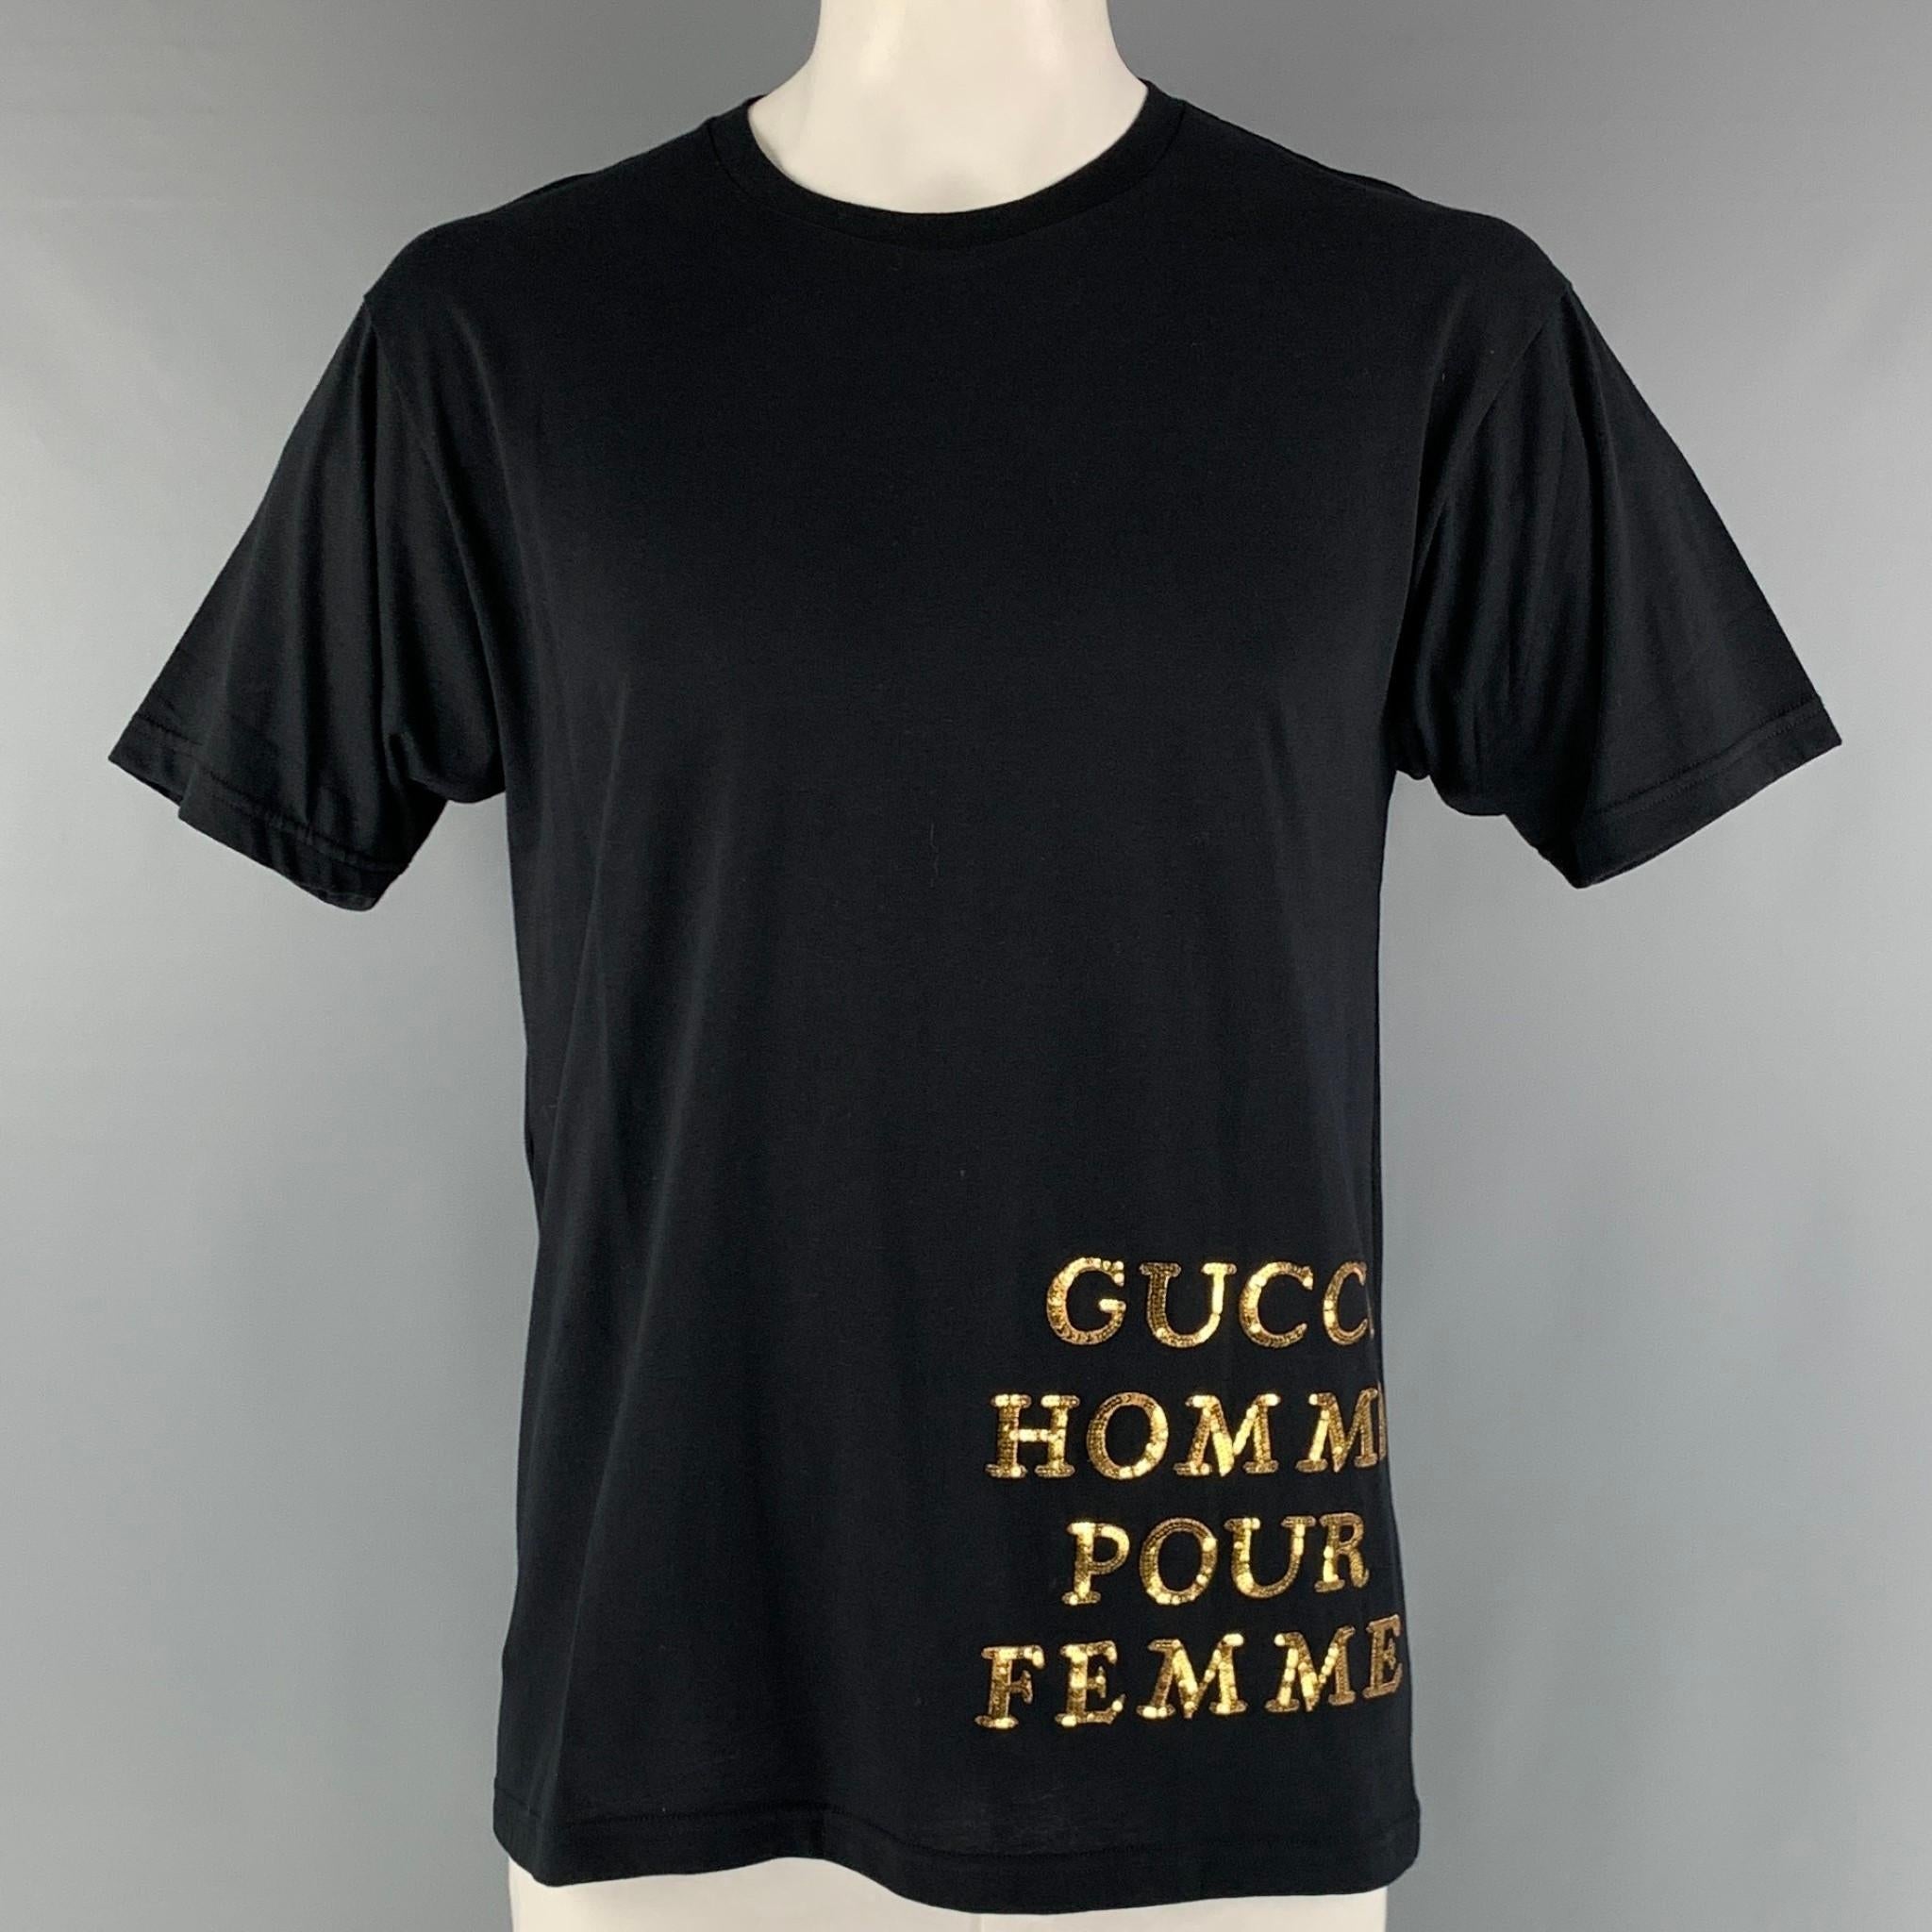 GUCCI oversized t-shirt comes in a black jersey cotton knit material featuring a gold tone embroidery phrase